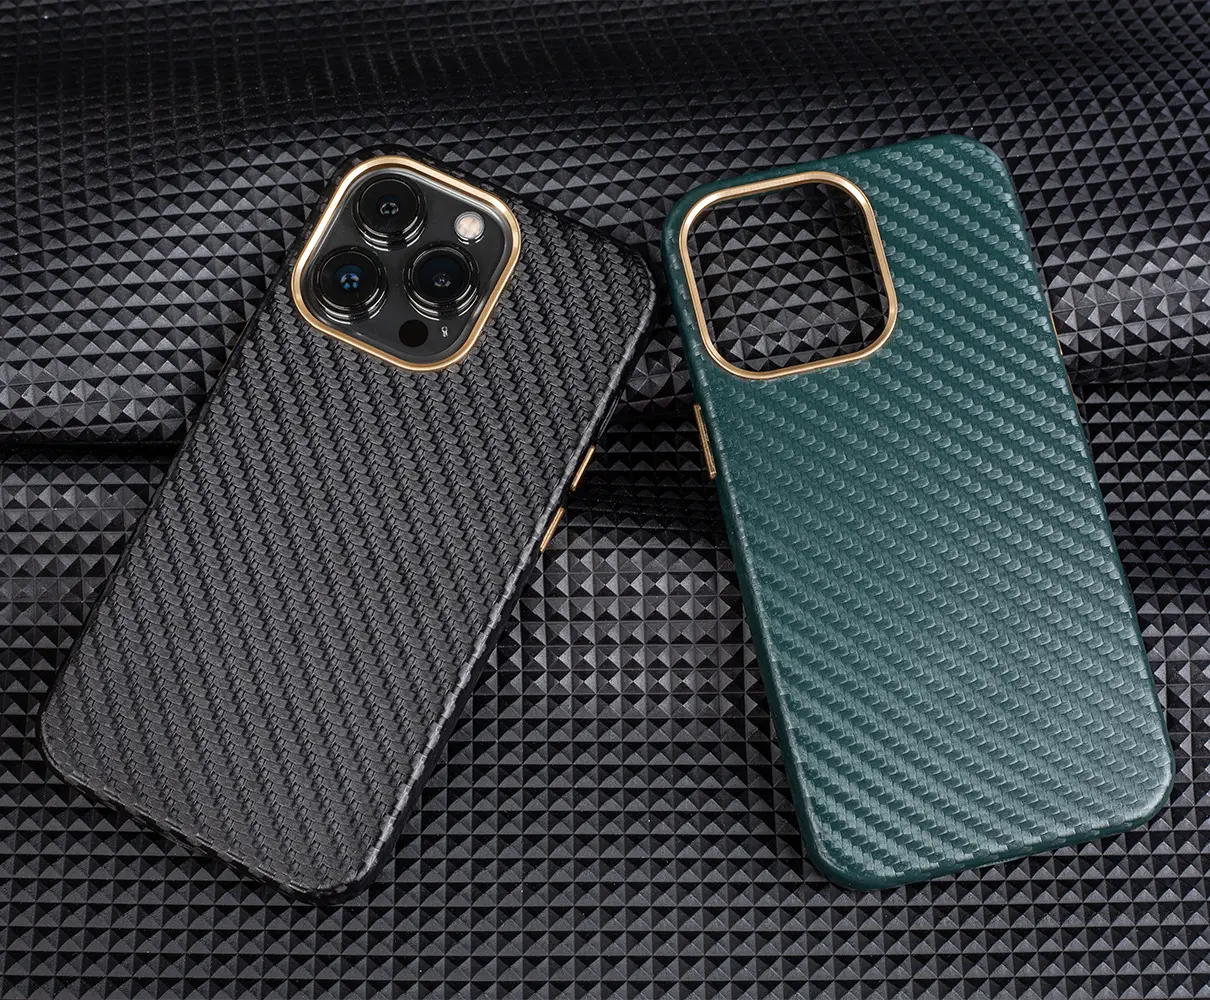 Luxury Designed Pure Real Carbon Fiber Case For Iphone 11 12 13 Pro Max